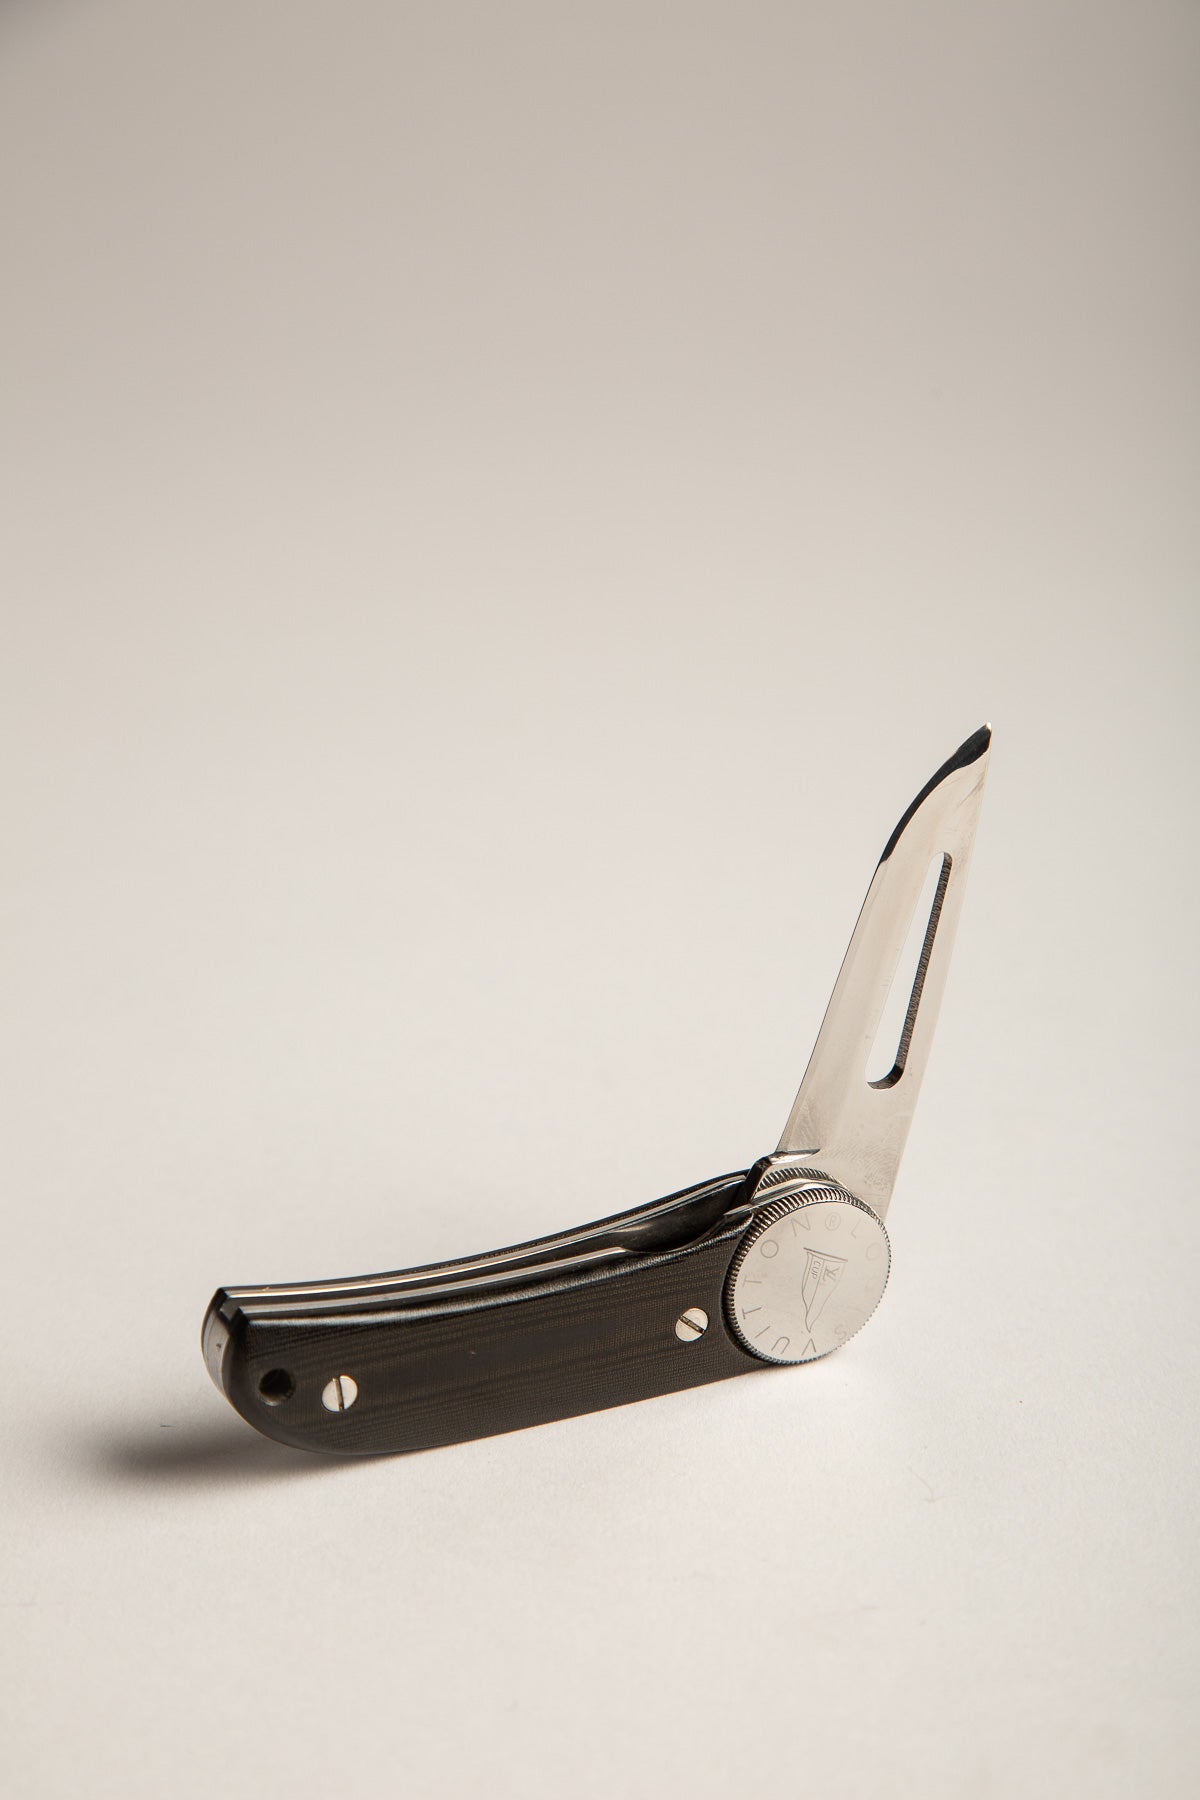 LOUIS VUITTON | 1995 AMERICA'S CUP POCKET KNIFE